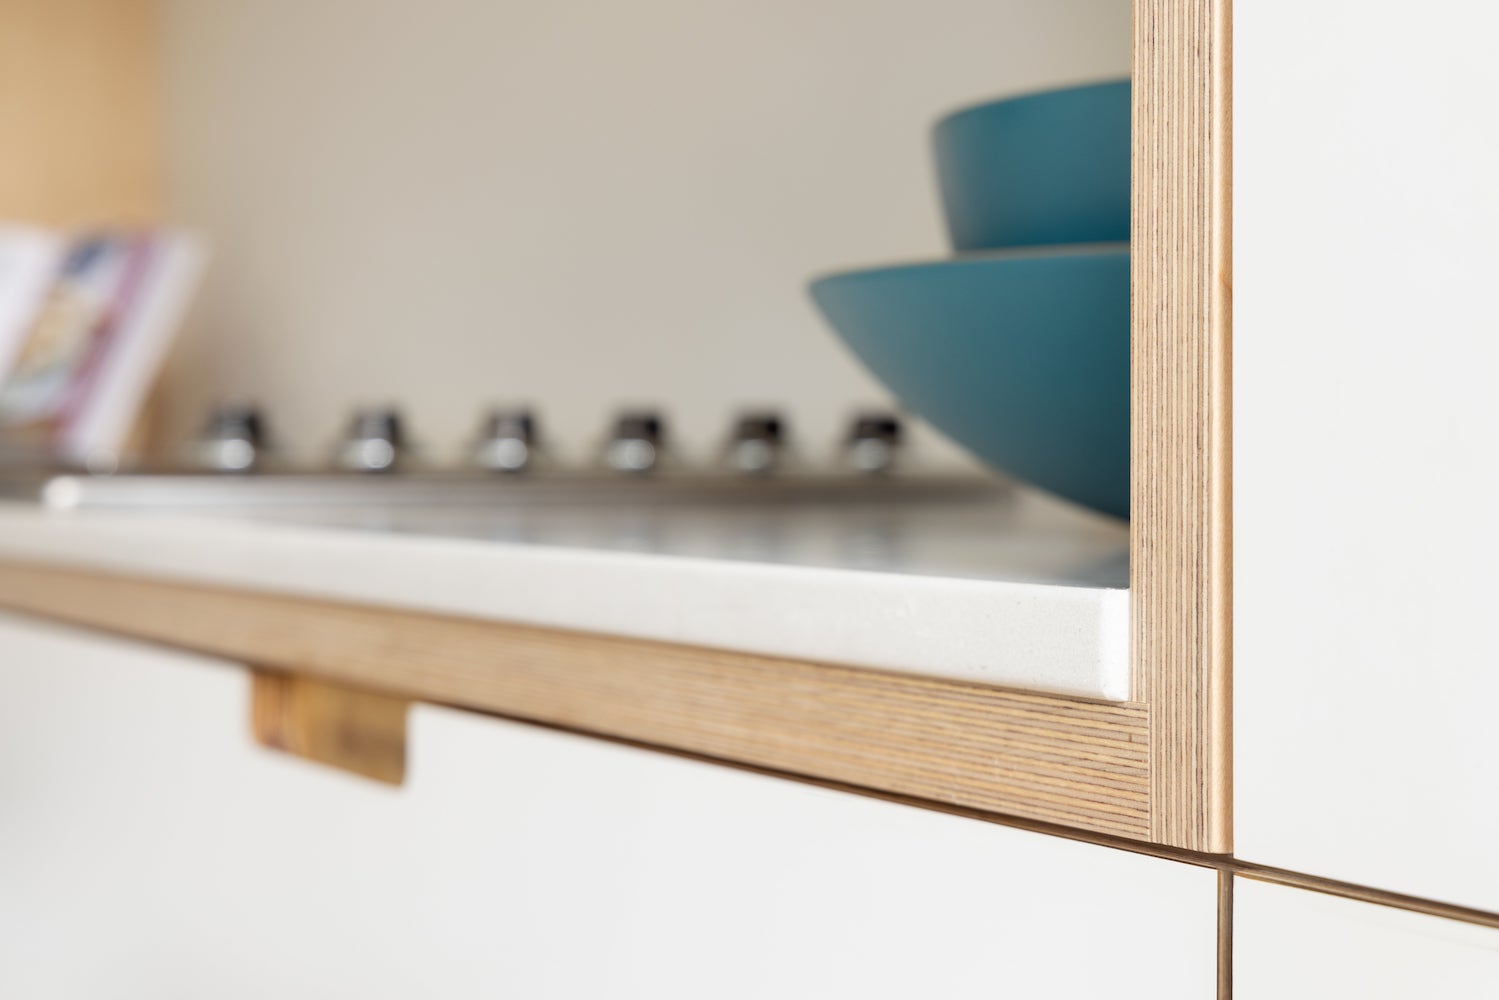 Detail of expertly coordinated corner angle with cabinetry, countertop, drawers aligned